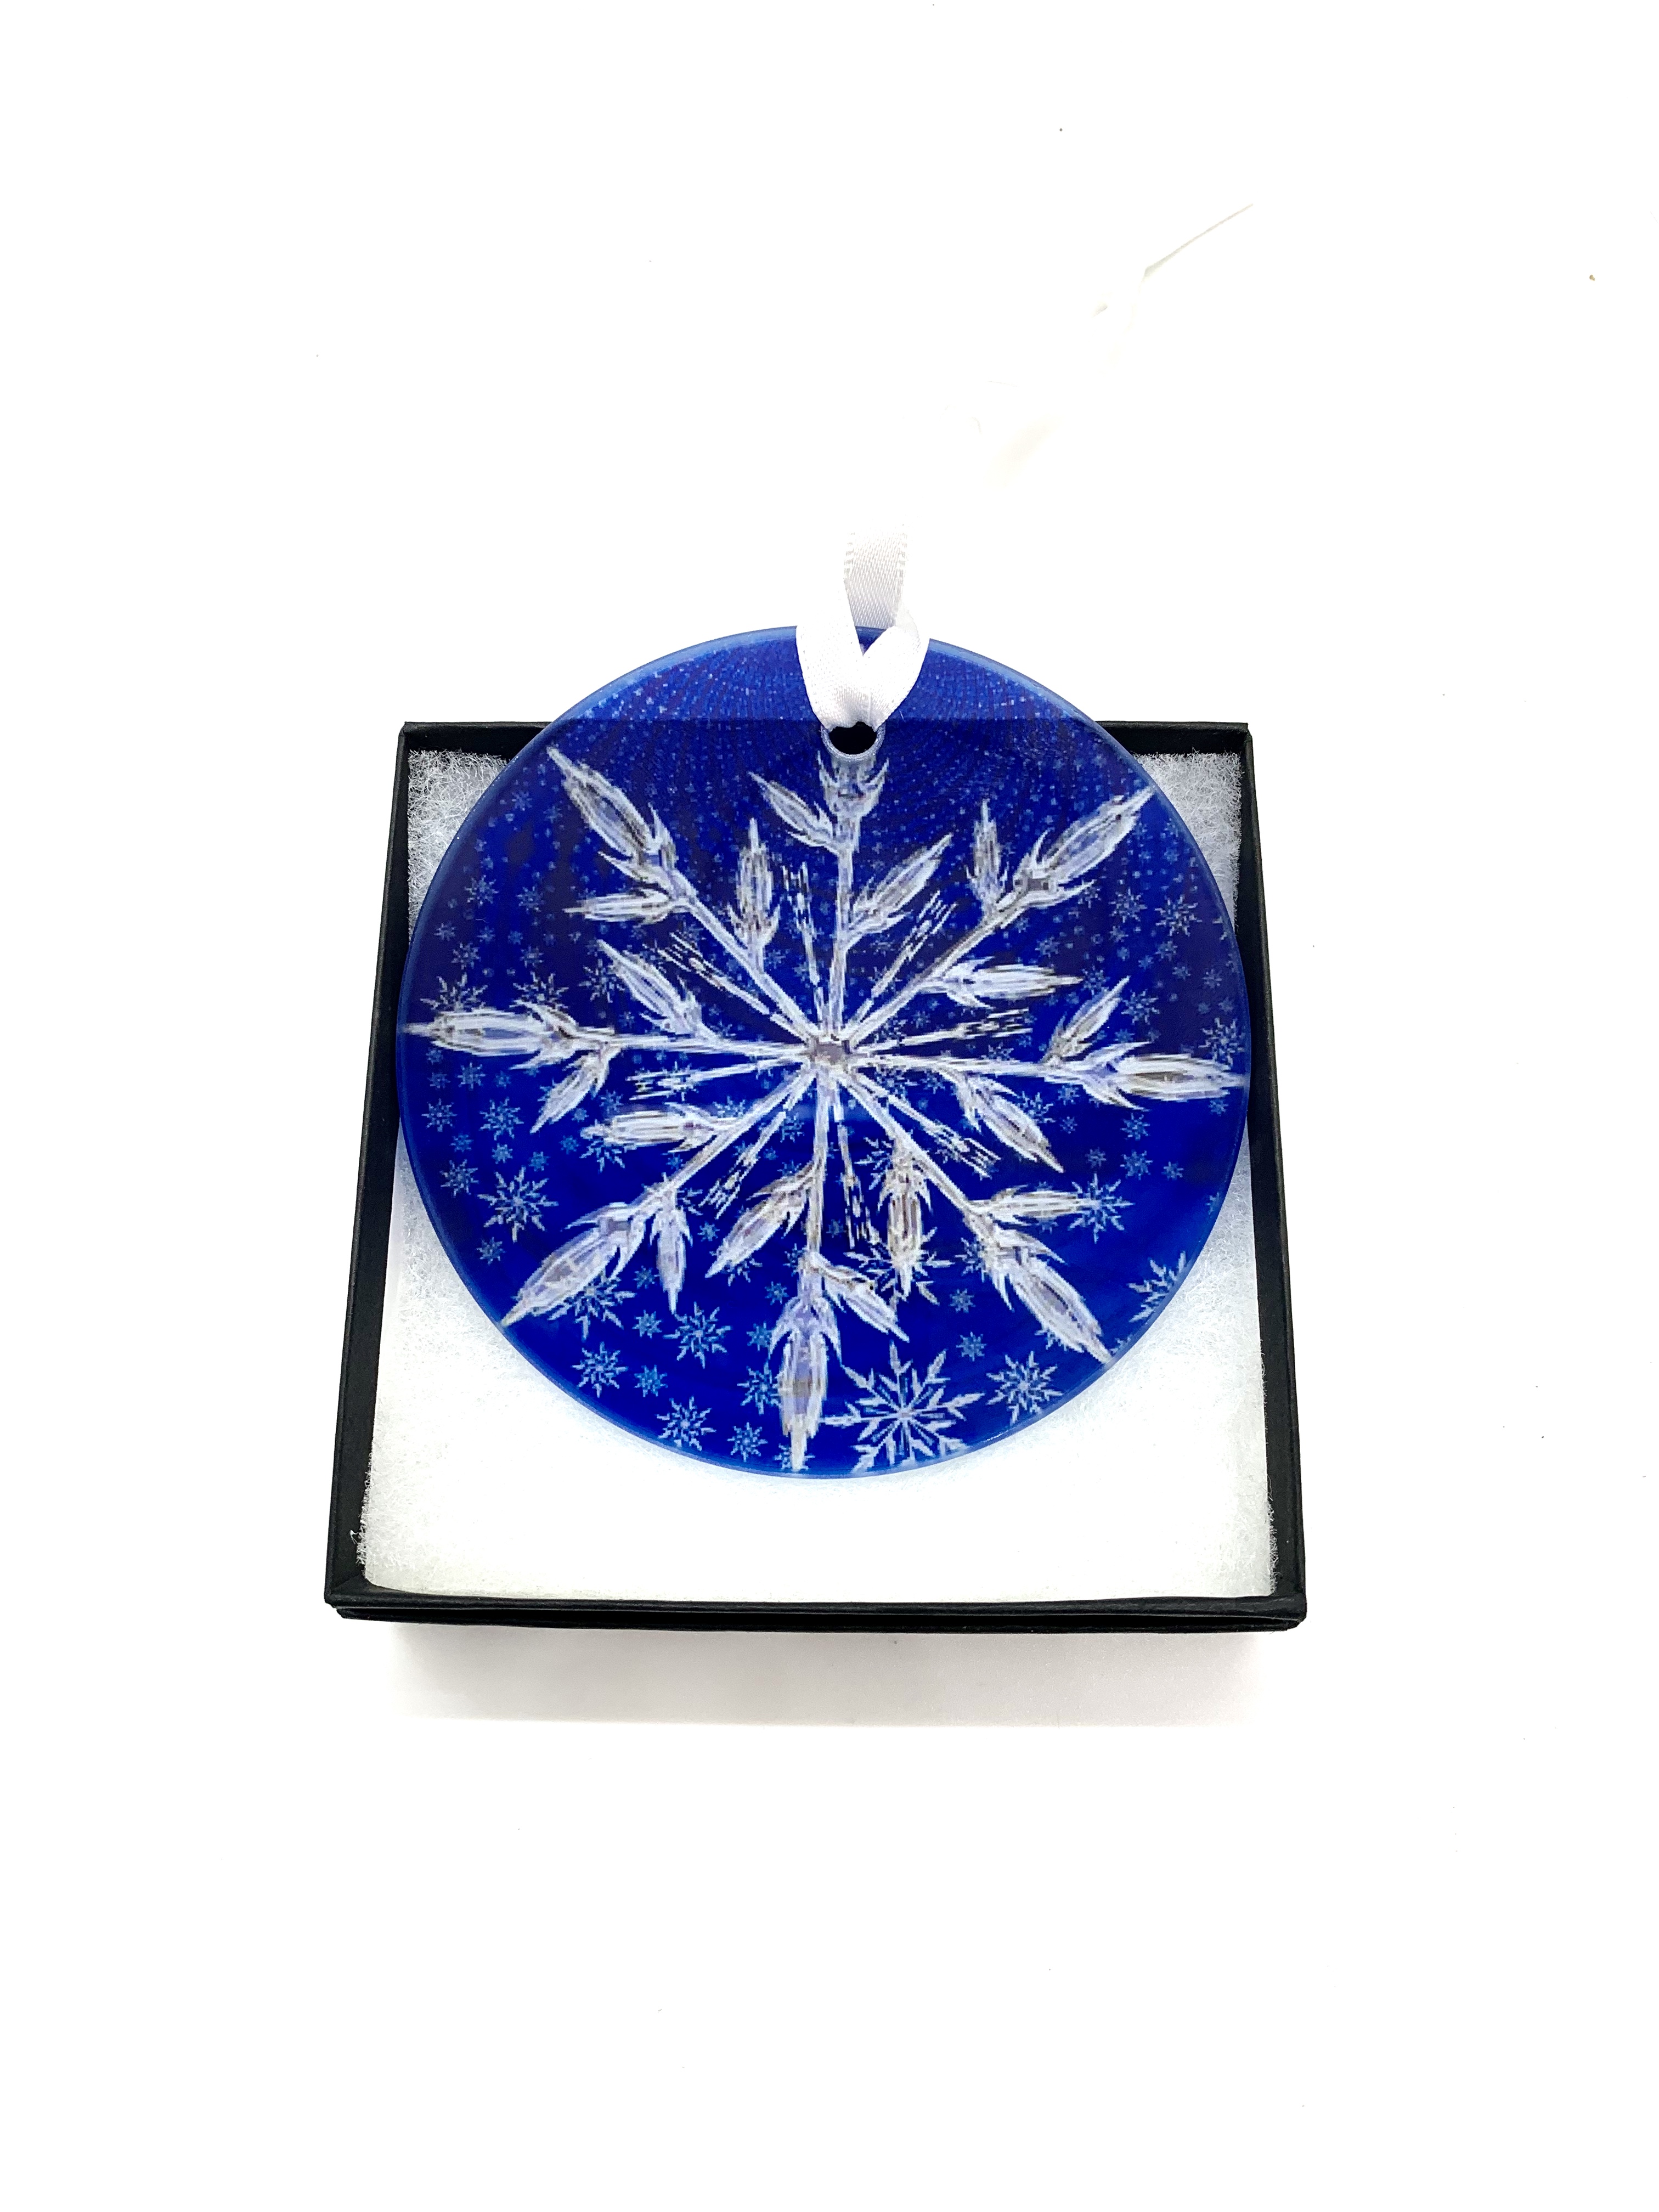 Snowflake made with sublimation printing